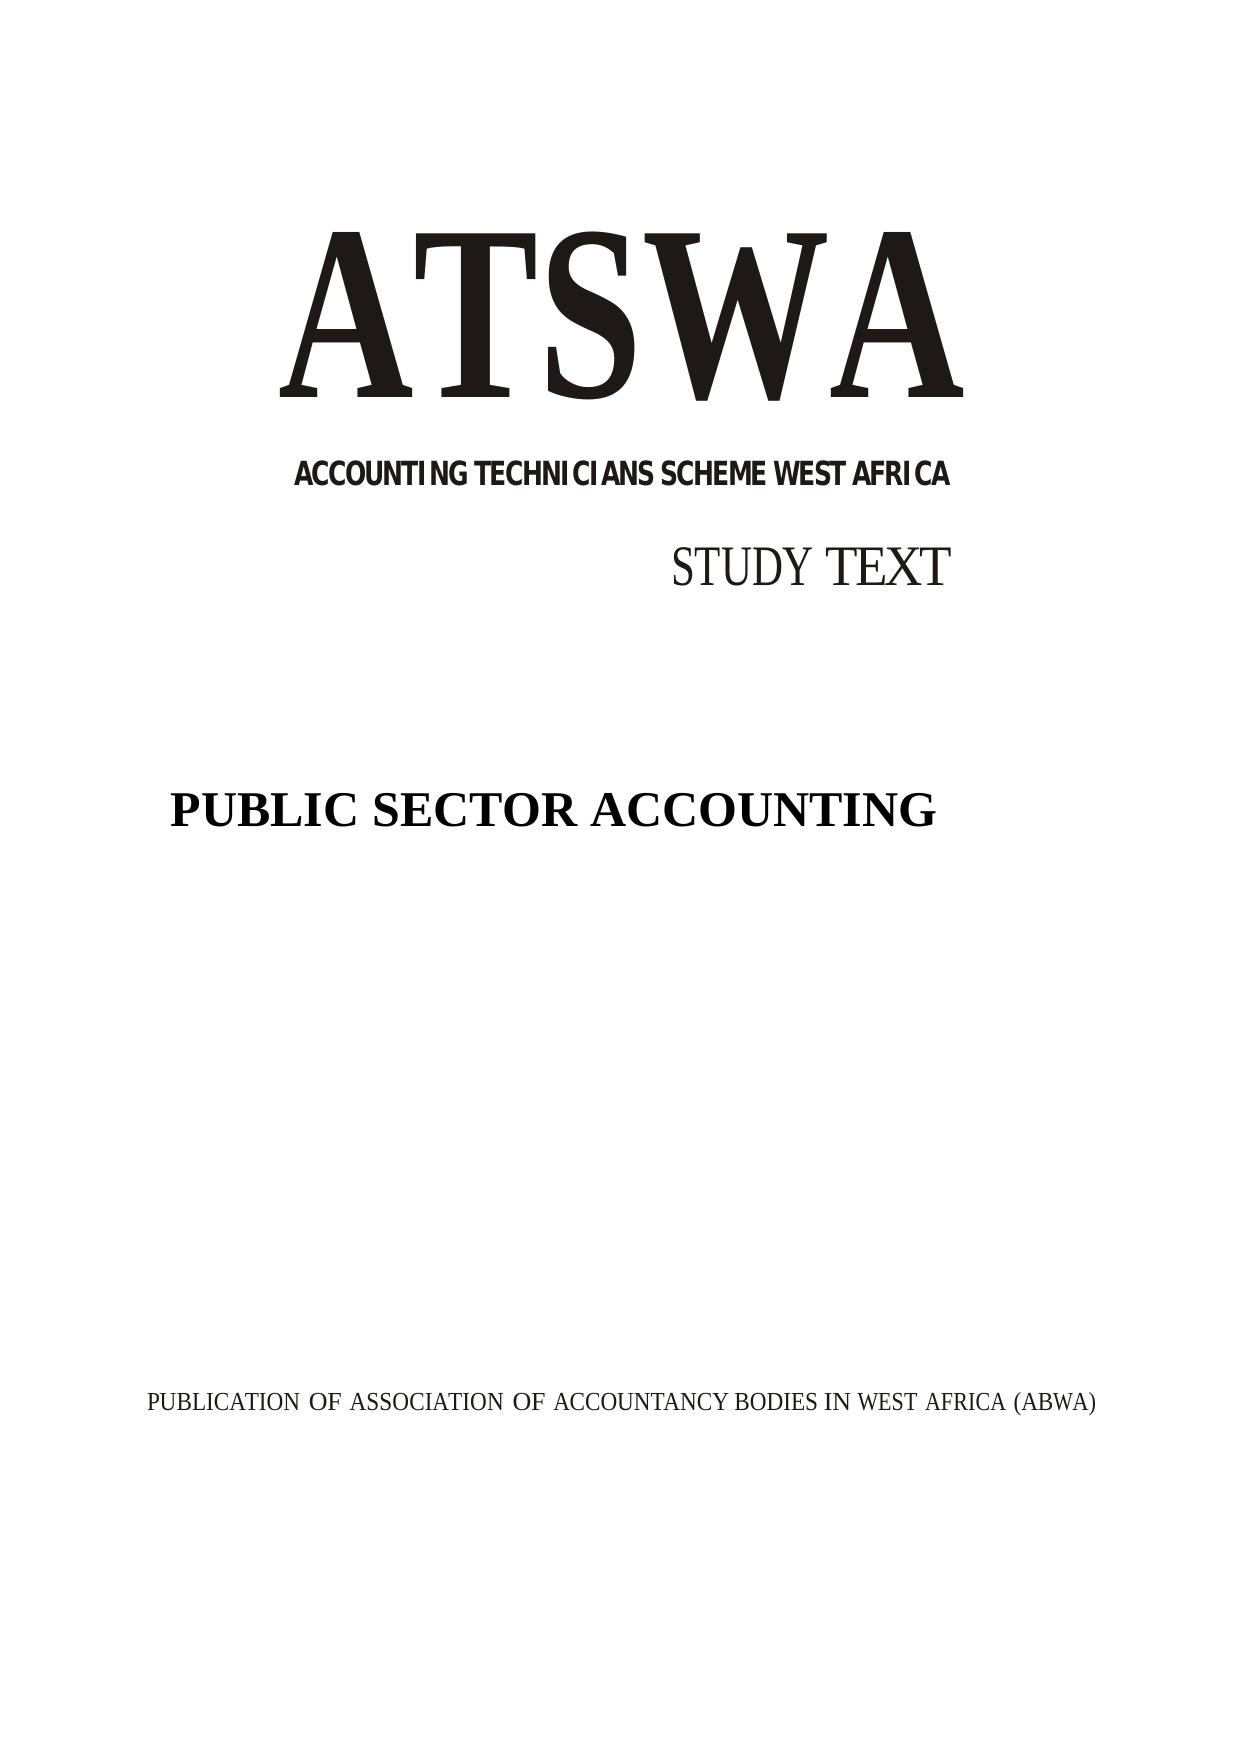 PUBLIC SECTOR ACCOUNTING 3rd edition 2009